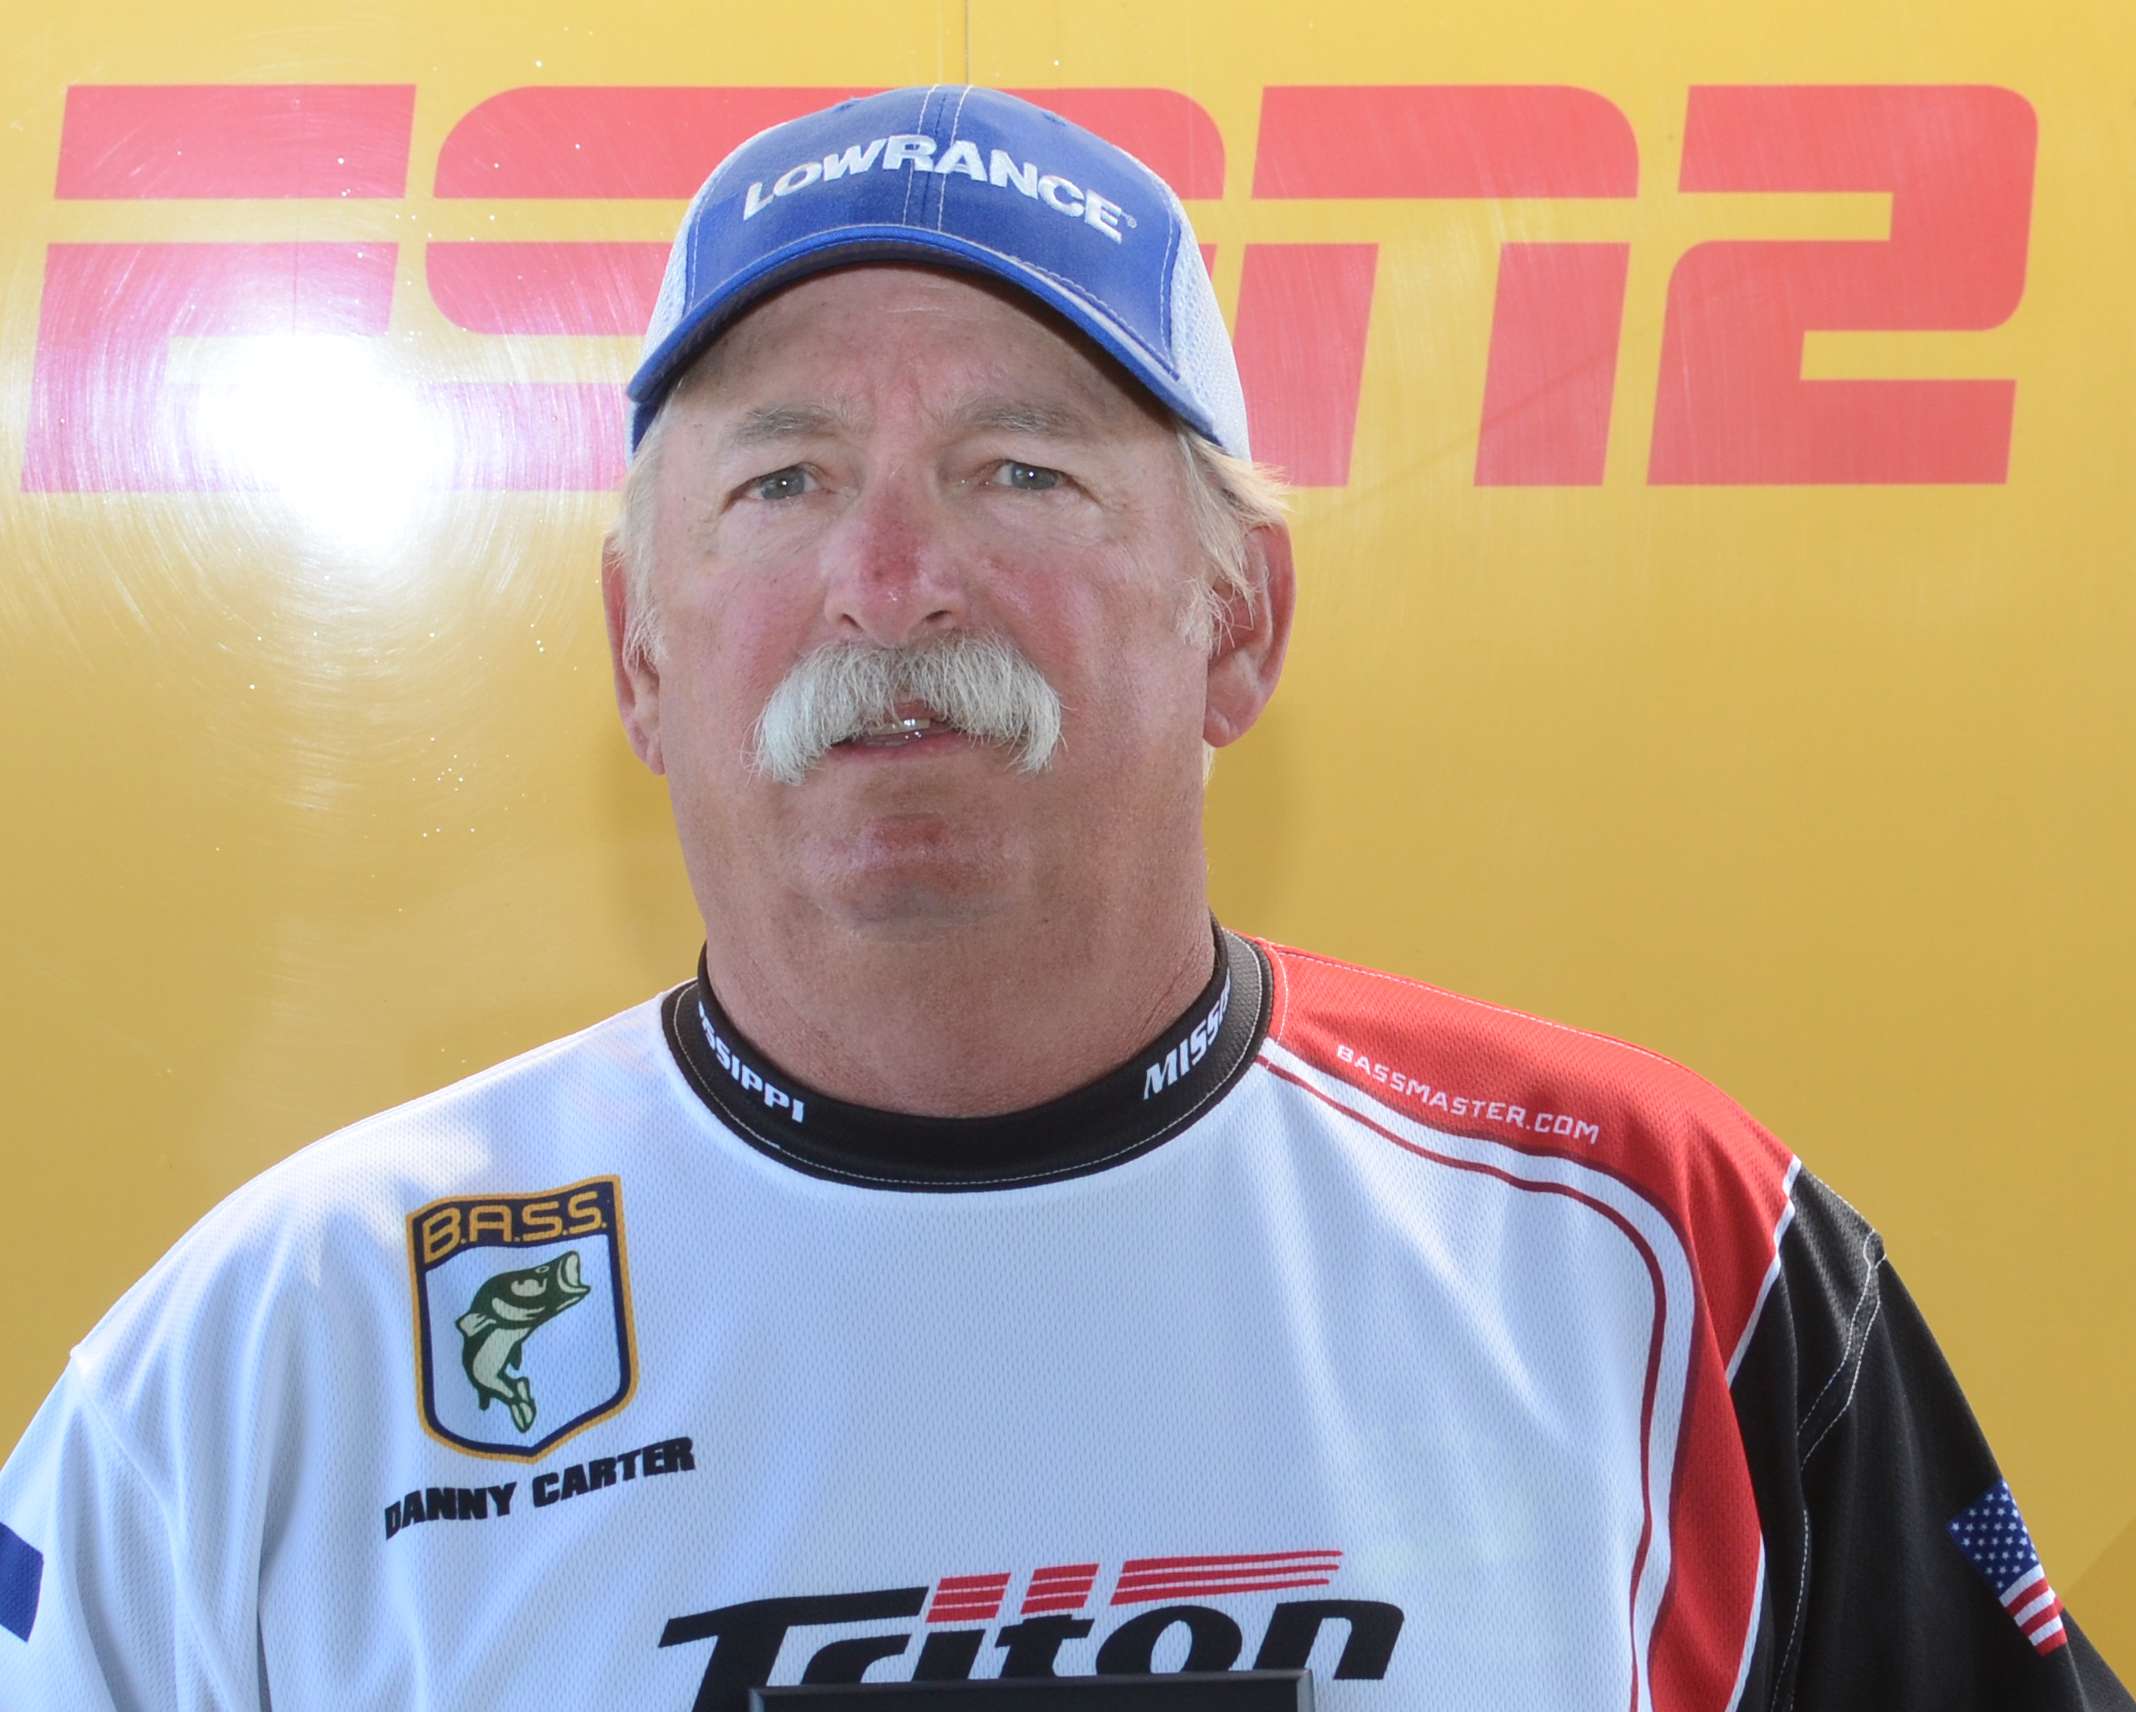 Danny Carter <br>
Mississippi Boater <br>
Danny Carter of the North Mississippi B.A.S.S. Association has qualified for the championship before, and heâs back at it for his second time. He likes duck hunting as well as gardening. His sponsors are Peanut Craft Lures and Sports of All Sorts. 